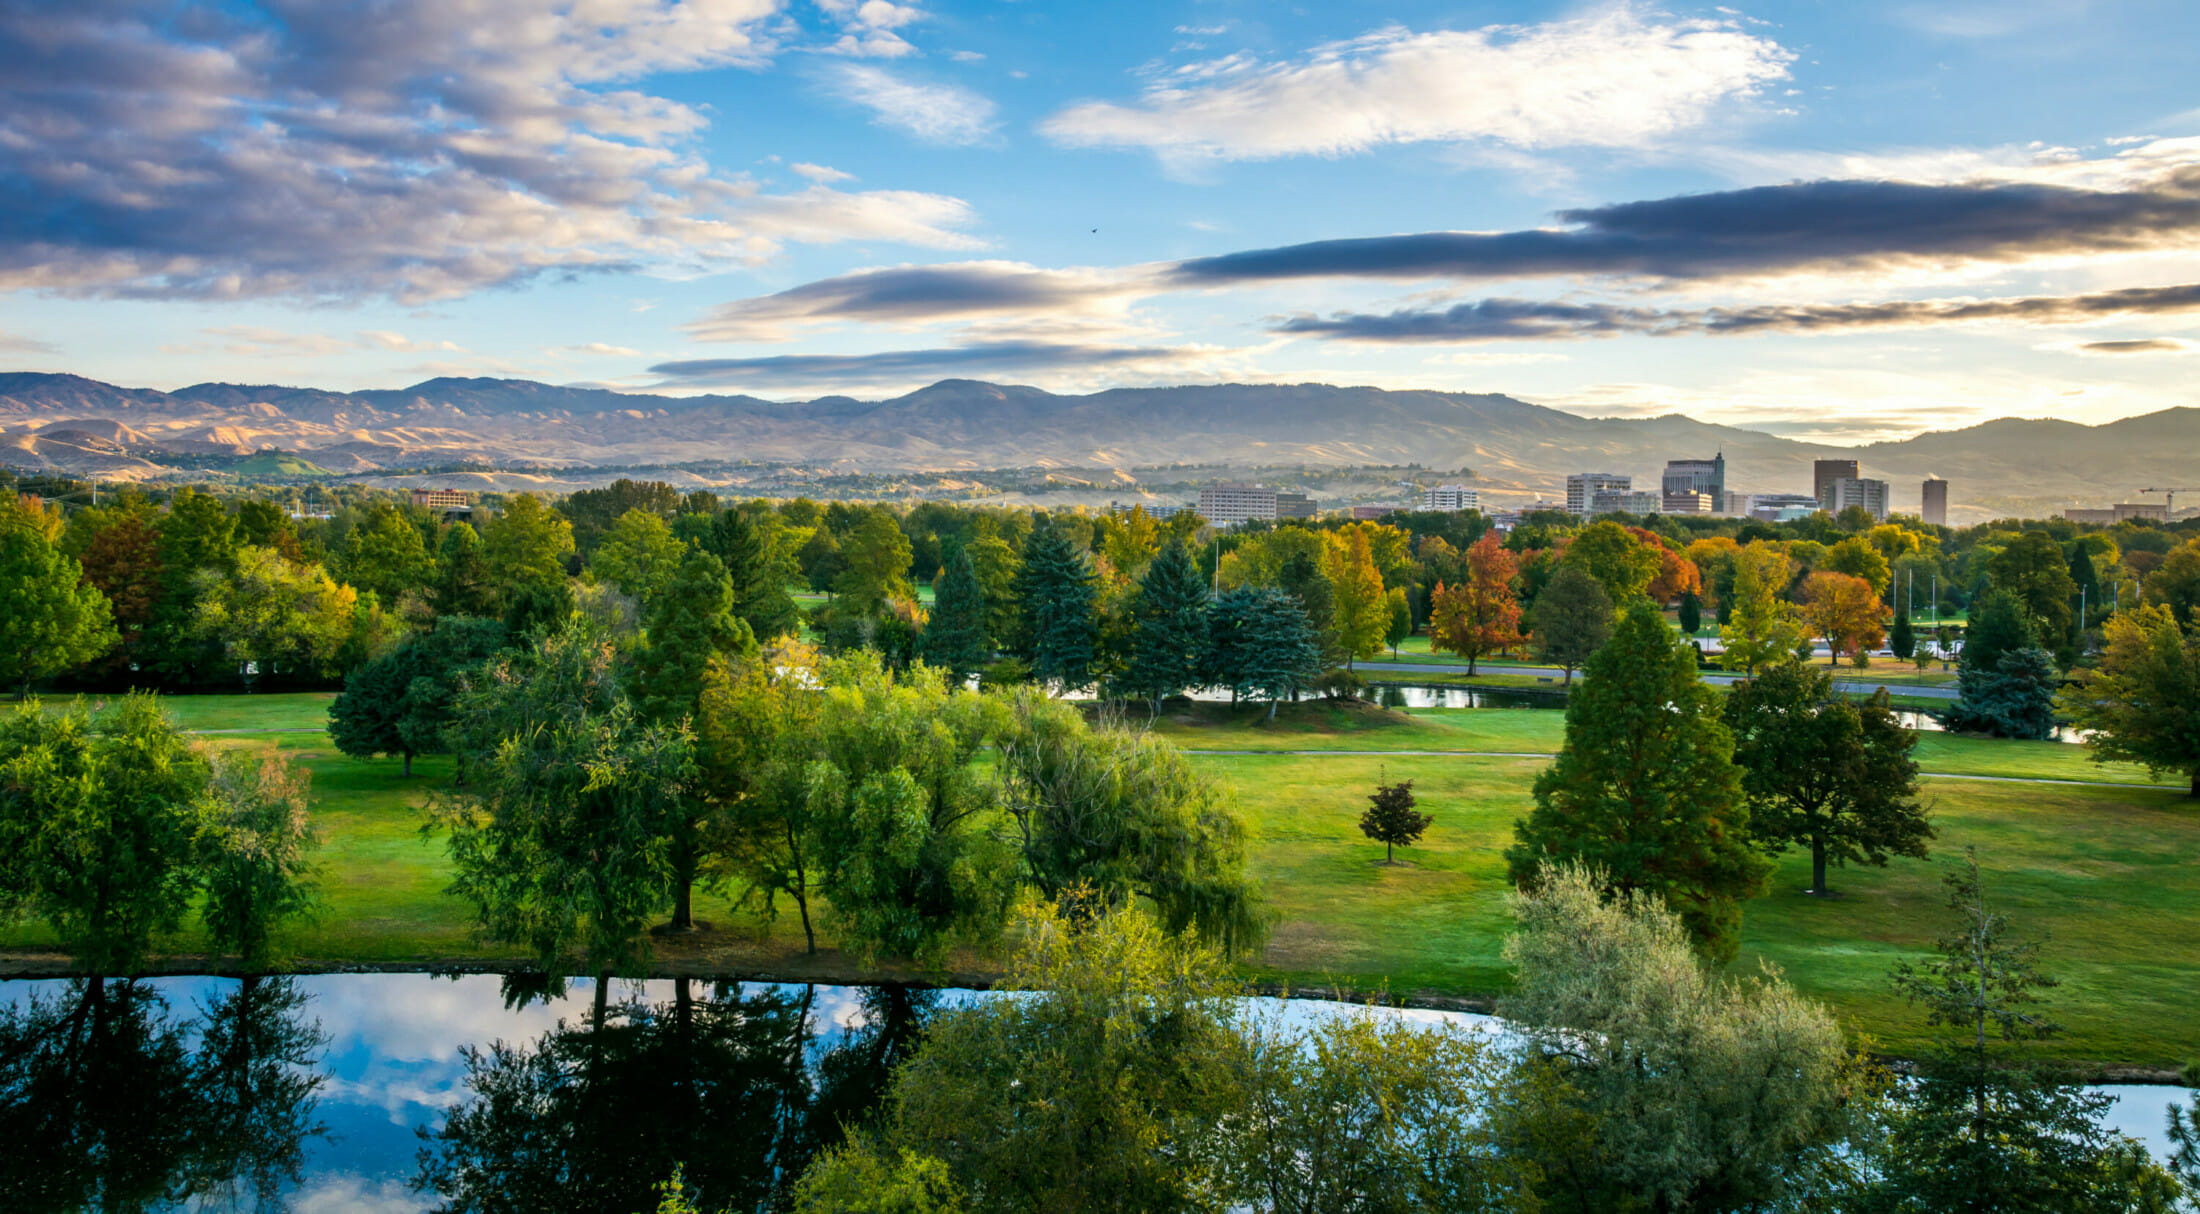 Boise, ID | Secondary Markets: 24 Cities to Watch in 2018 | Buildium